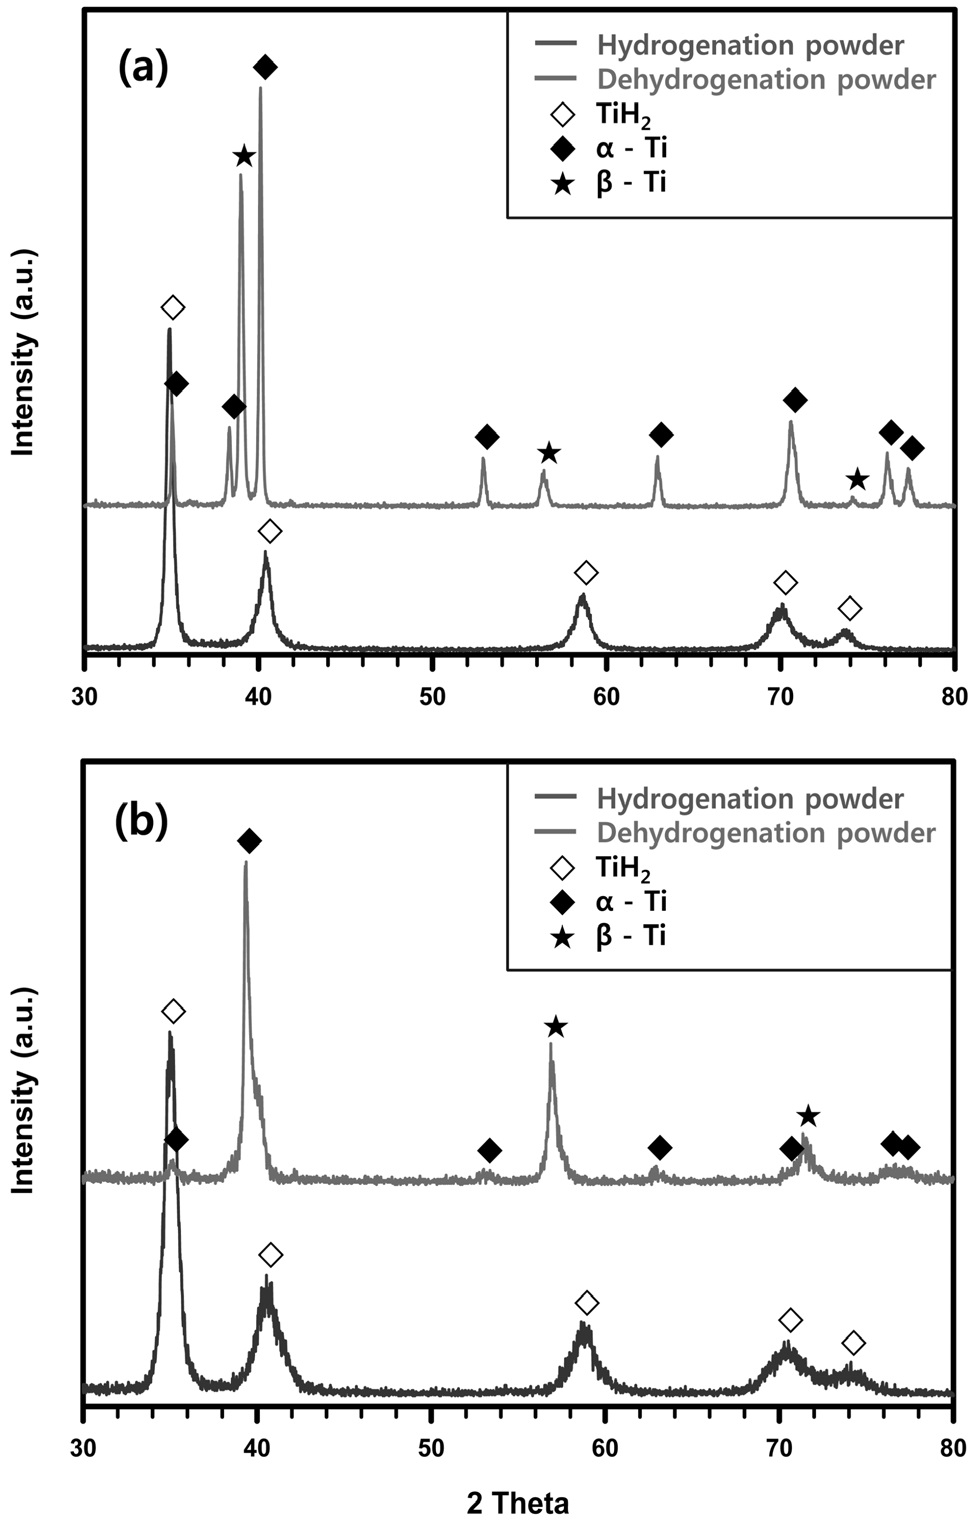 XRD patterns of hydrated and dehydrated powders of (a) the Ti-Mo and (b) the Ti-V alloys.